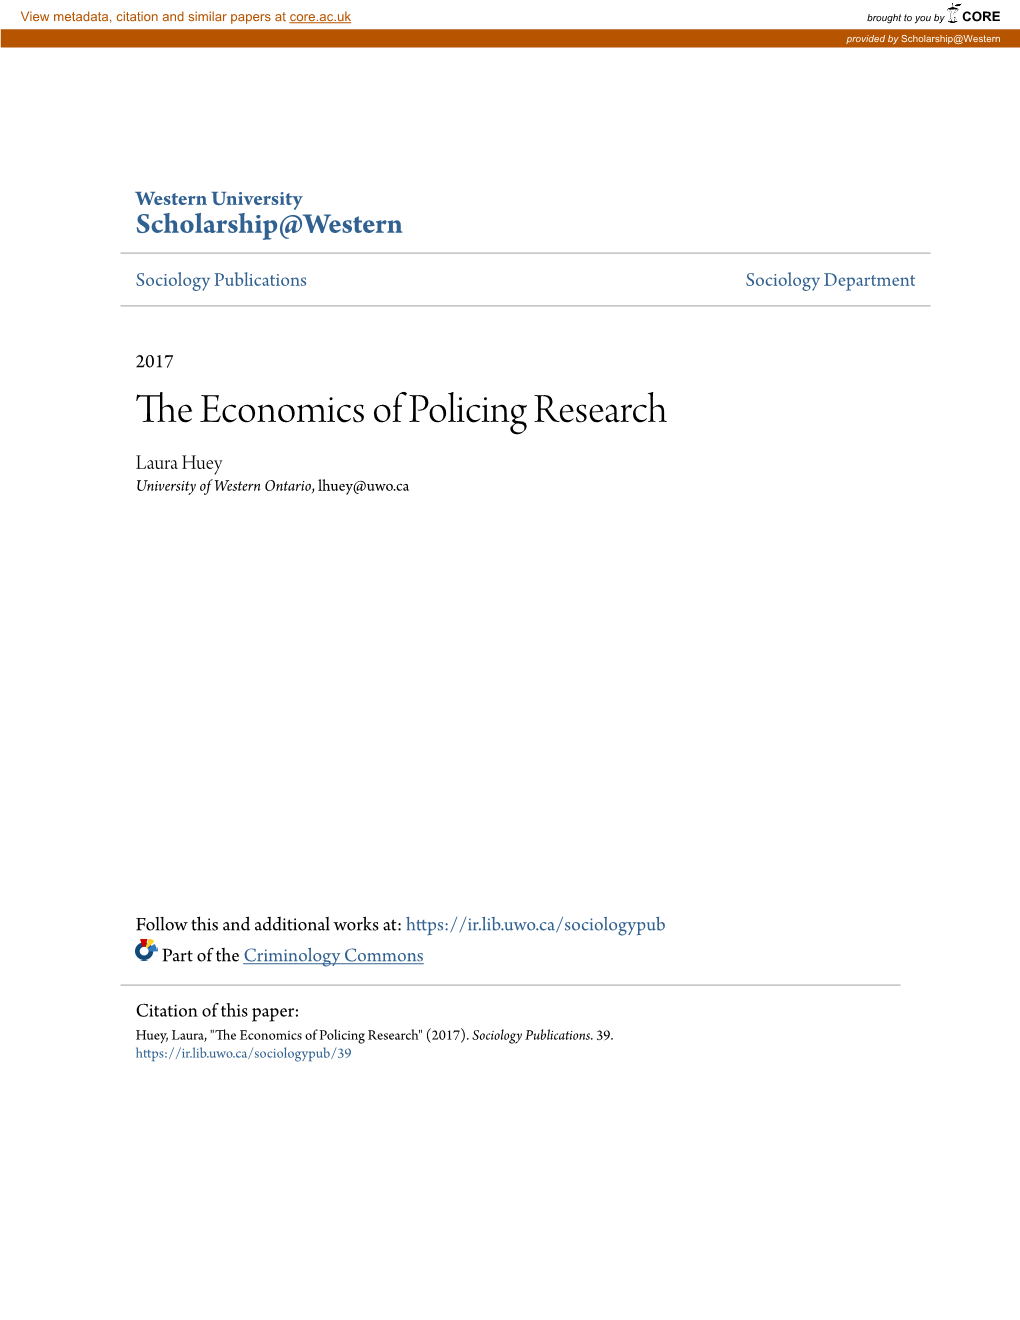 The Economics of Policing Research